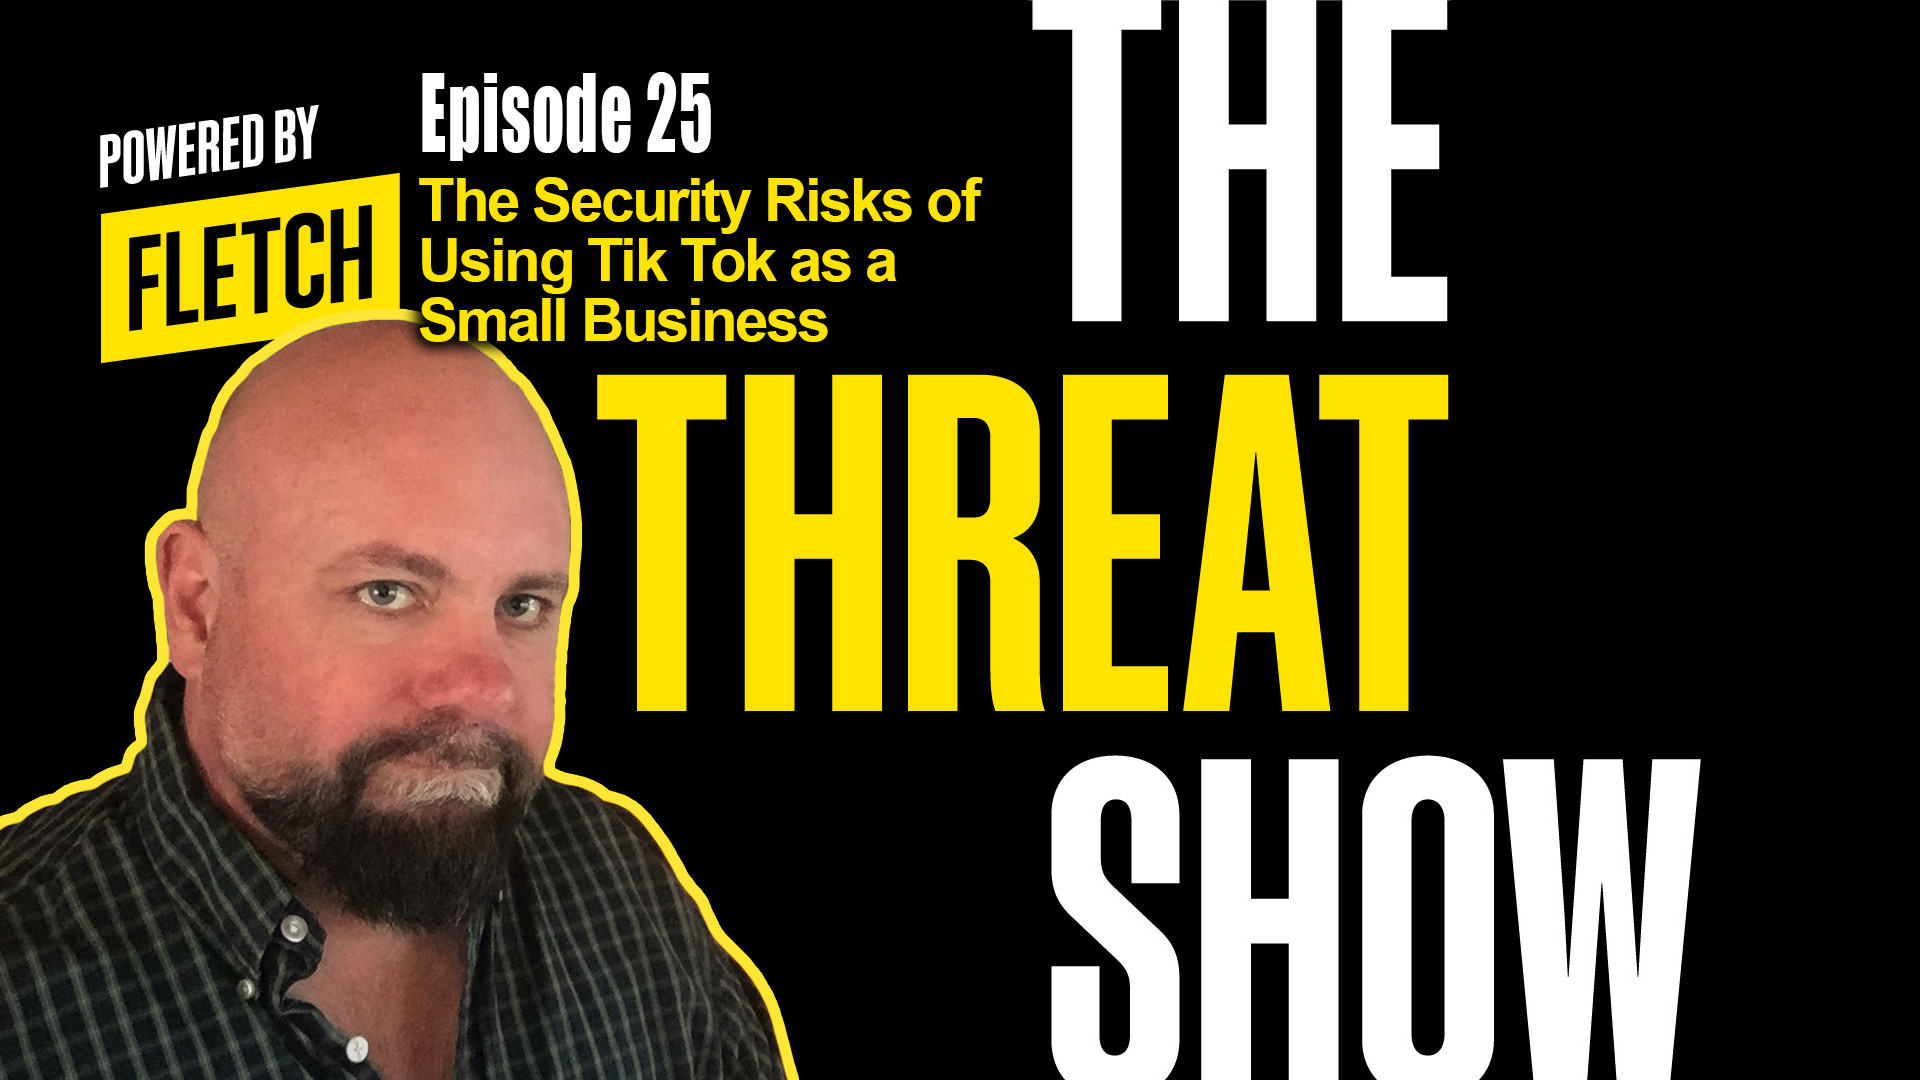 The Threat Show Ep. 25